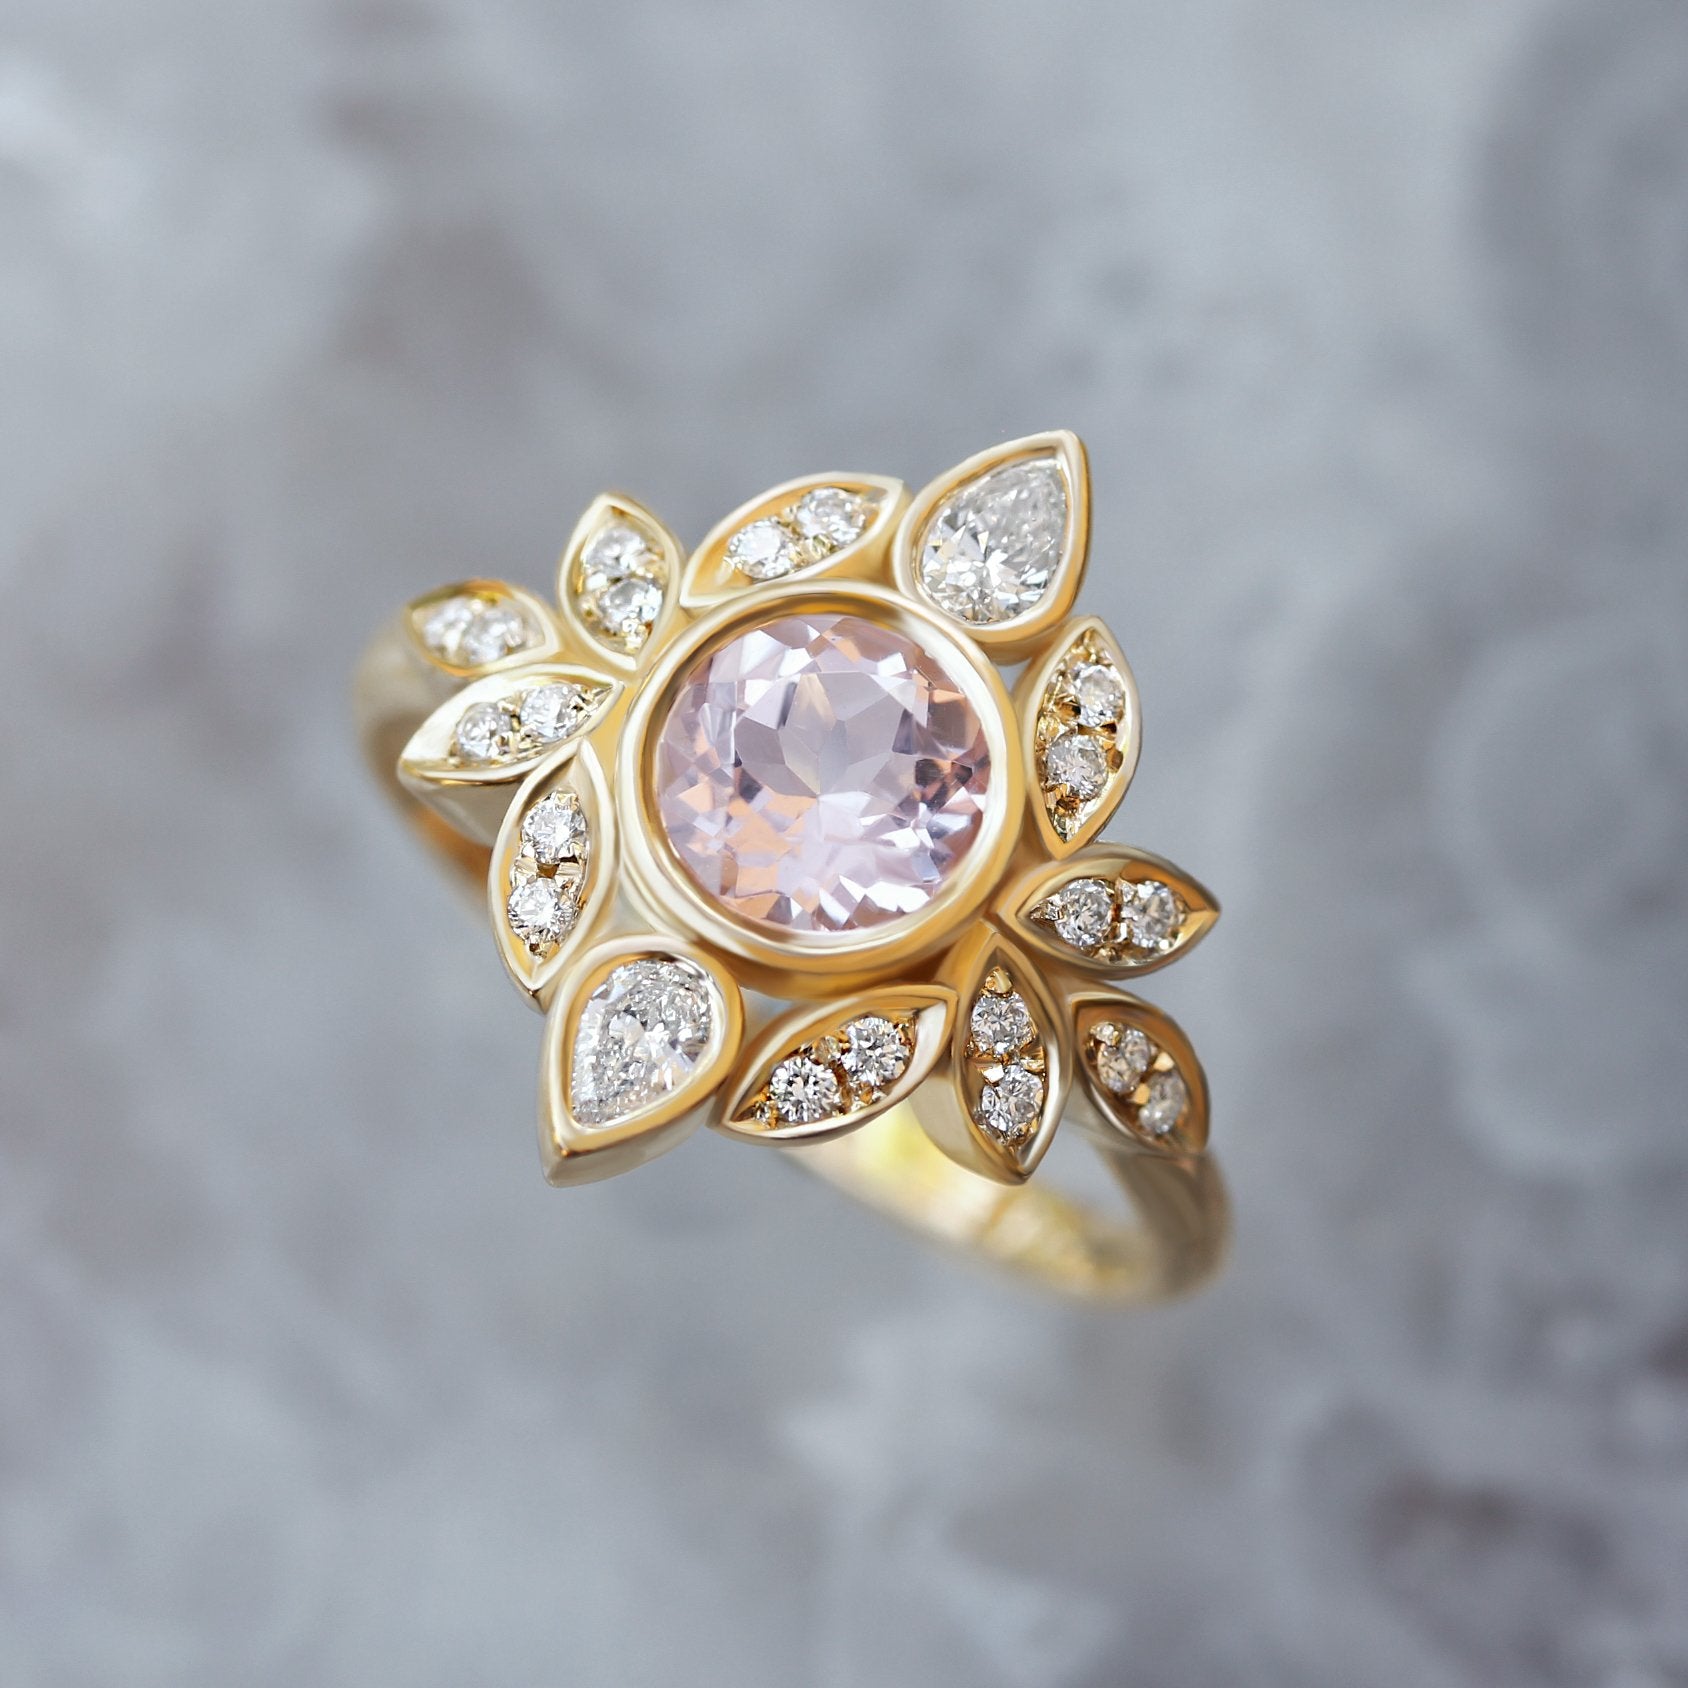 Morganite & Diamonds Flower Engagement Ring With Pave Diamond Rings Guard- Lily #5 ♥